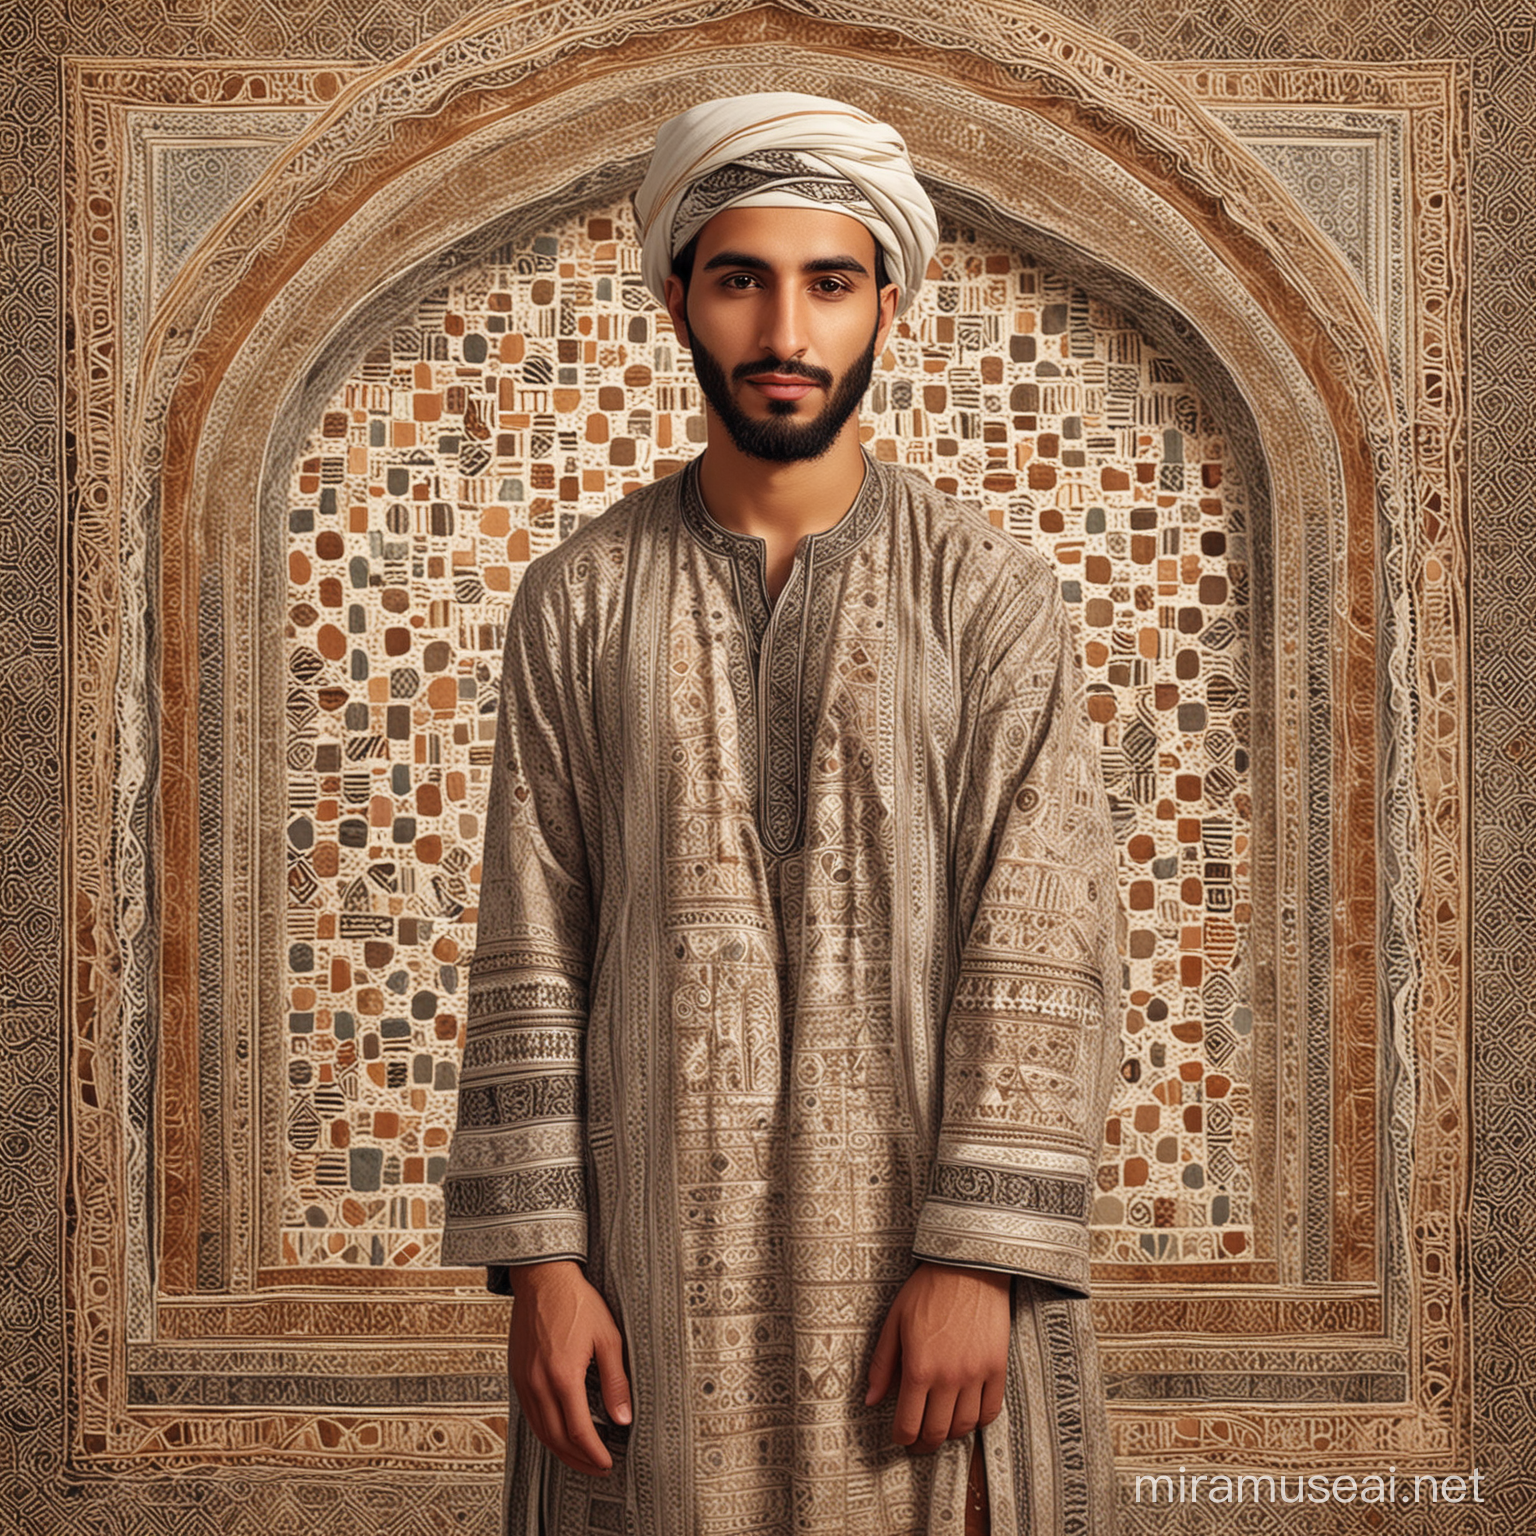 Very cute arab guy 30 years old rare beauty, folk clothing, background with arabic patterns, fantasy art, full body, thin lines, texture, ink drawing, acrylic, vintage, patchwork, detail drawing of short story collection, surreal, tyndall effect 9, lighting Dynamic, sfumato, perfect proportions, high detail, full body